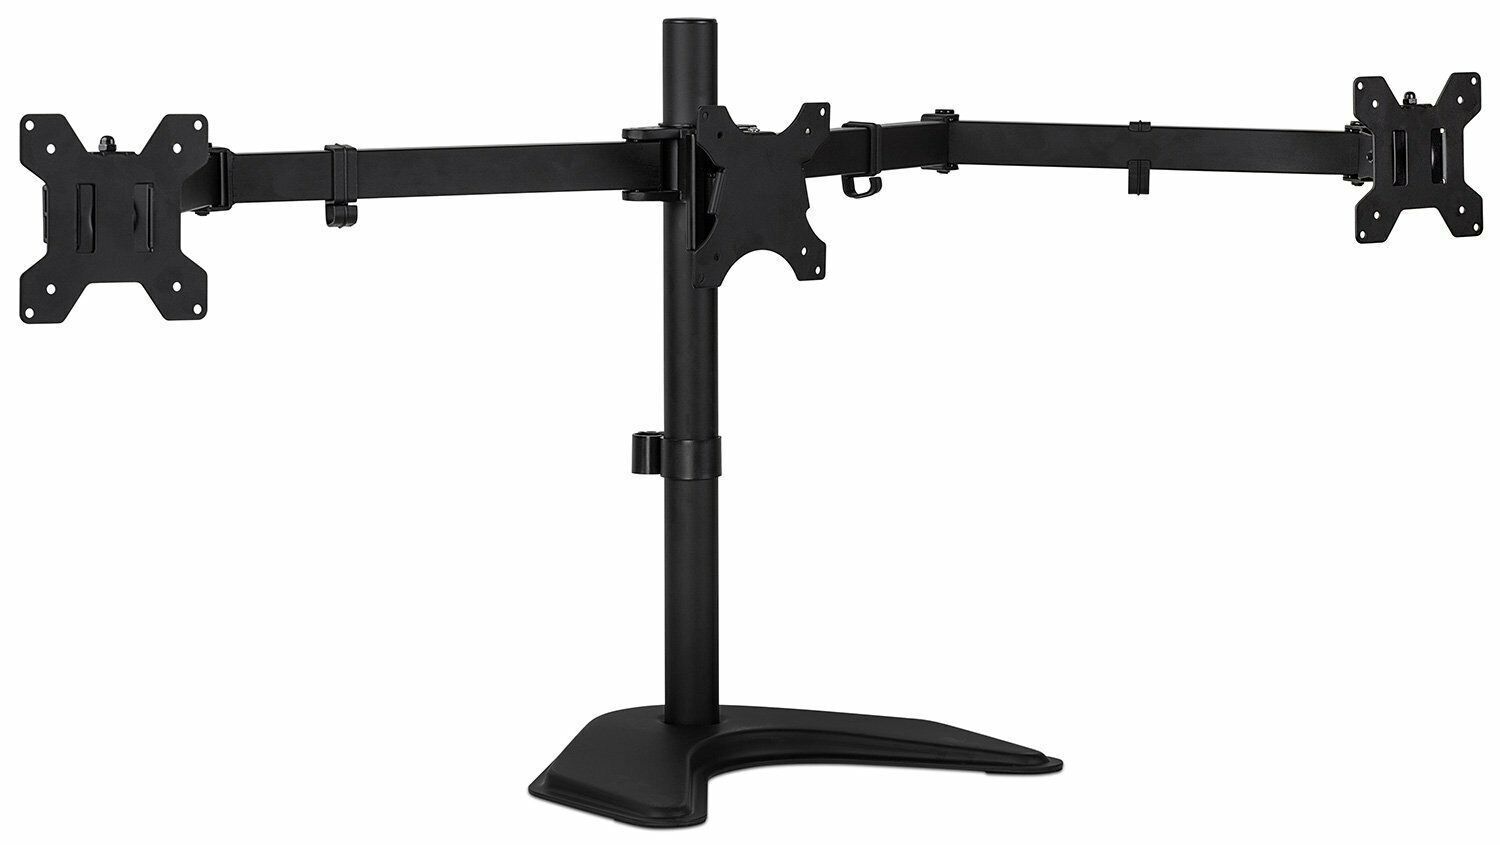 Mount-It Triple Monitor Stand 3 Monitor Stand Fits 19-27 Inch Computer Screens